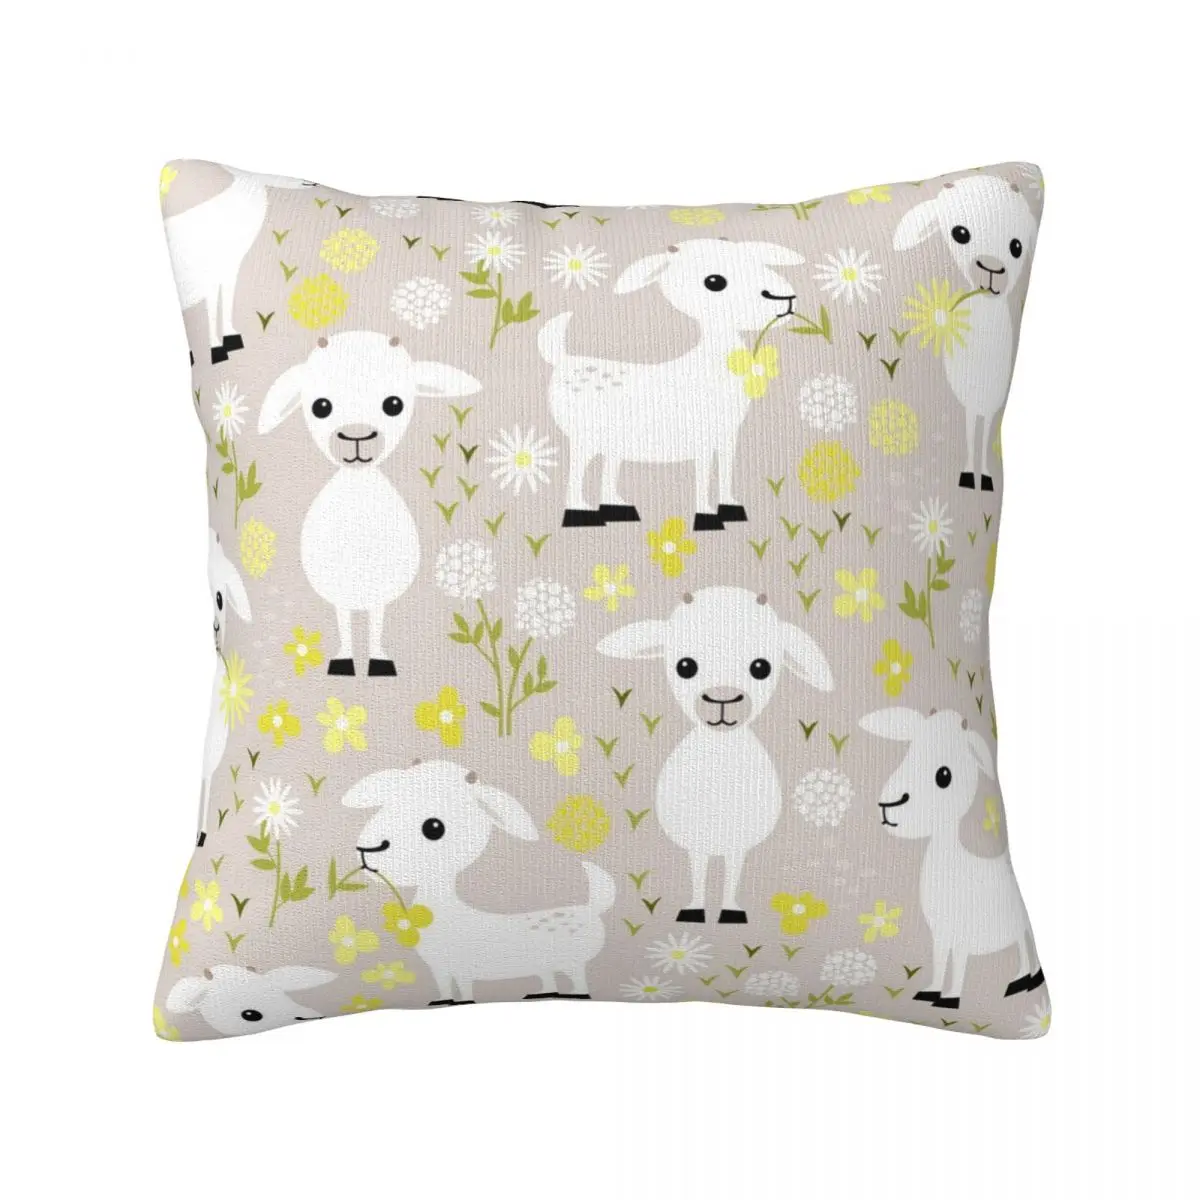 

Baby Goats Throw Pillow Cover Decorative Pillow Covers Home Pillows Shells Cushion Cover Zippered Pillowcase